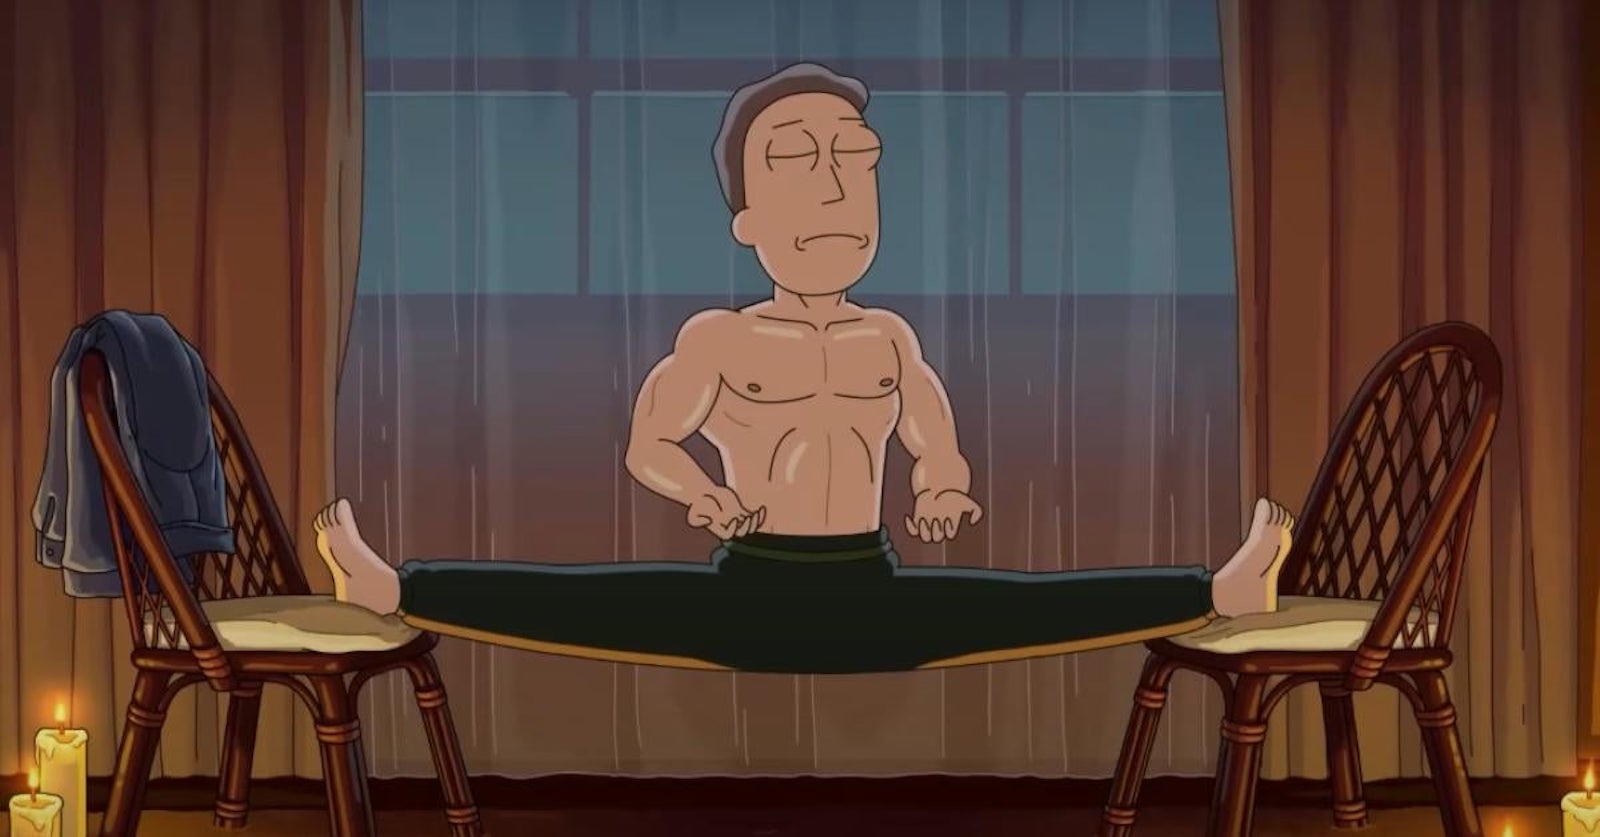 Rick and Morty 7: Jerry as Jean-Claude Van Damme in Bloodsport in new image